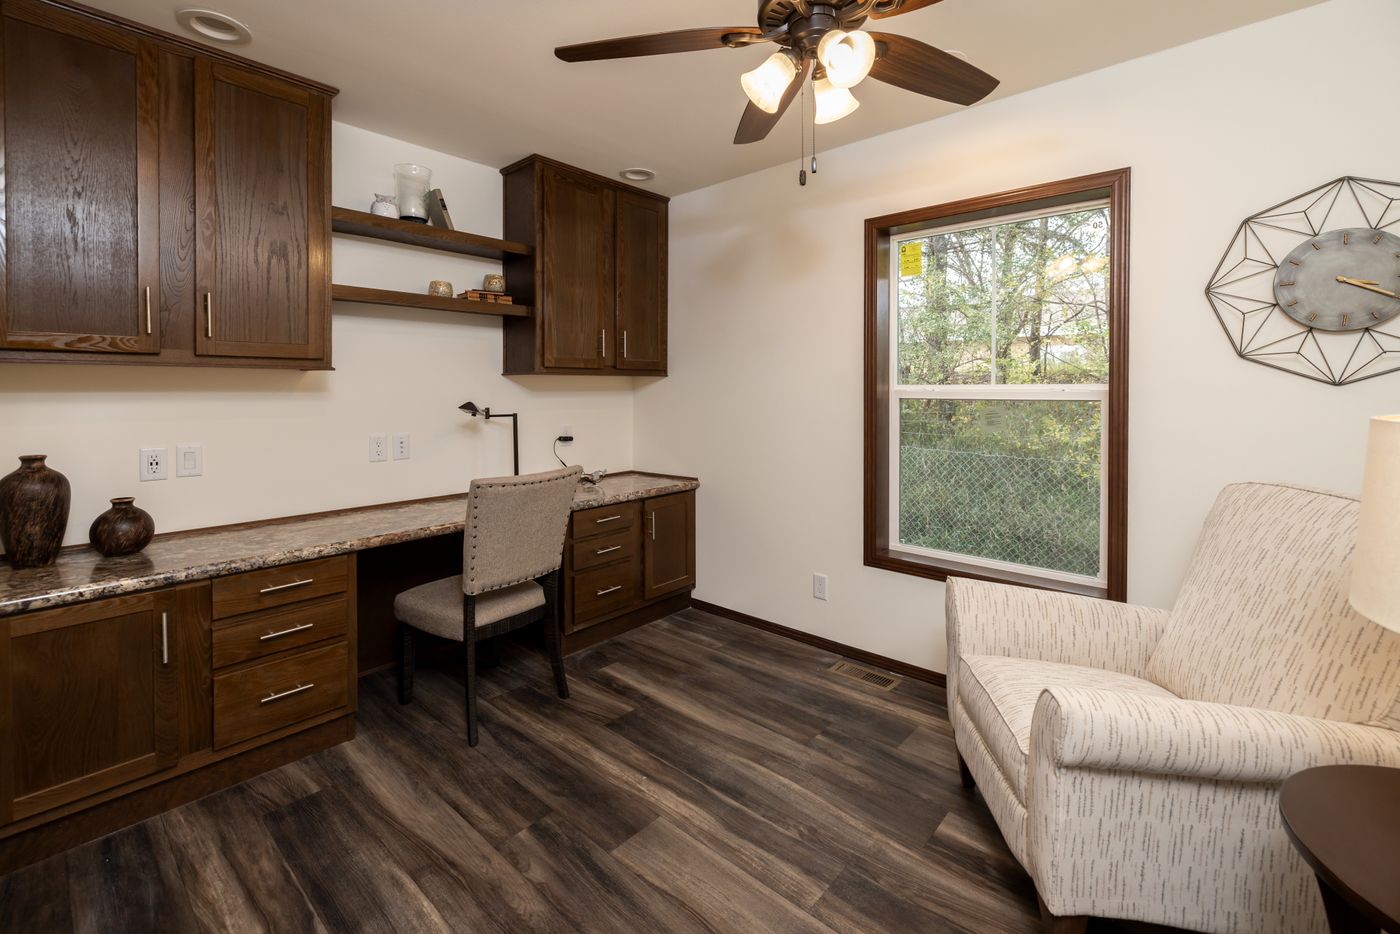 The LEGACY 327 Office. This Manufactured Mobile Home features 3 bedrooms and 2 baths.